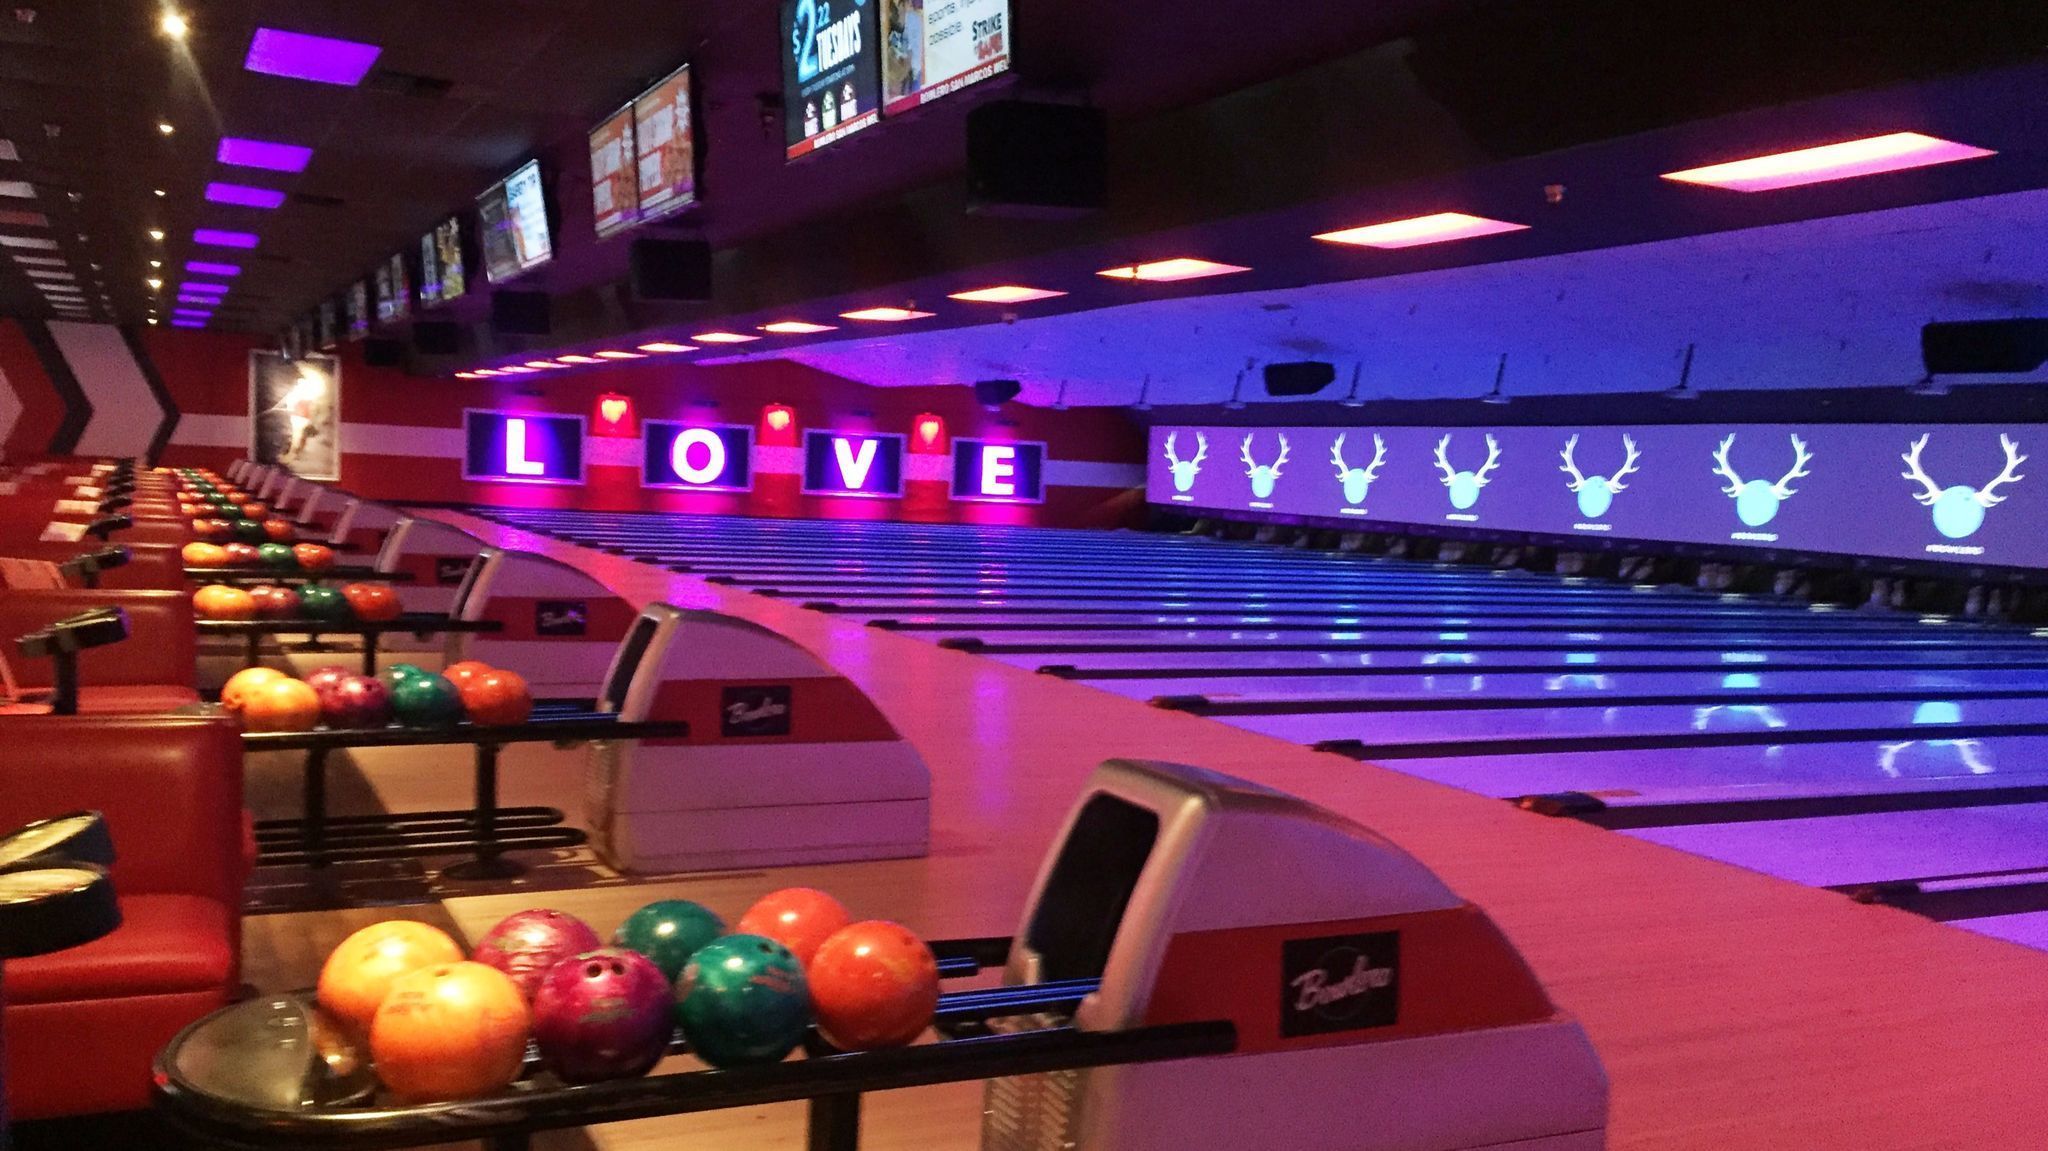 Bowlero offers a hip, upscale twist on bowling - The San Diego Union